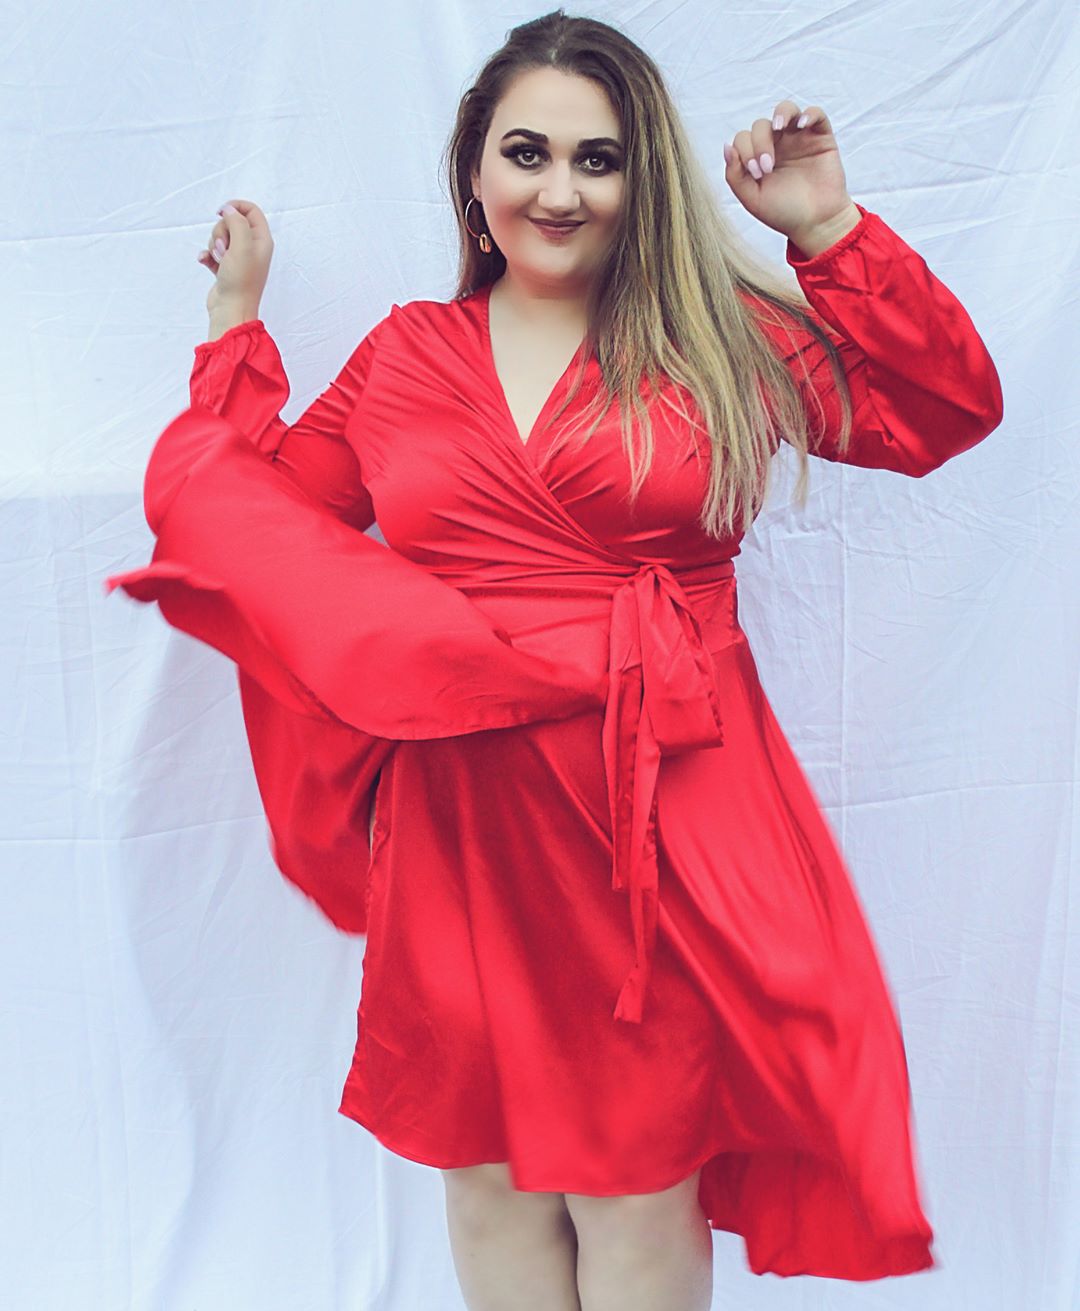 Rosegal - 💥💥Plus Size Midi Dress💥💥⁣
Reviewed by @thick_and_curly⁣
⁣
Search: 287922105⁣
Use Code: RGH20 to enjoy 18% off!⁣
#rosegal #plussizefashion #Rosegalcurvygirl #curvygirl⁣
Note: How to find the...